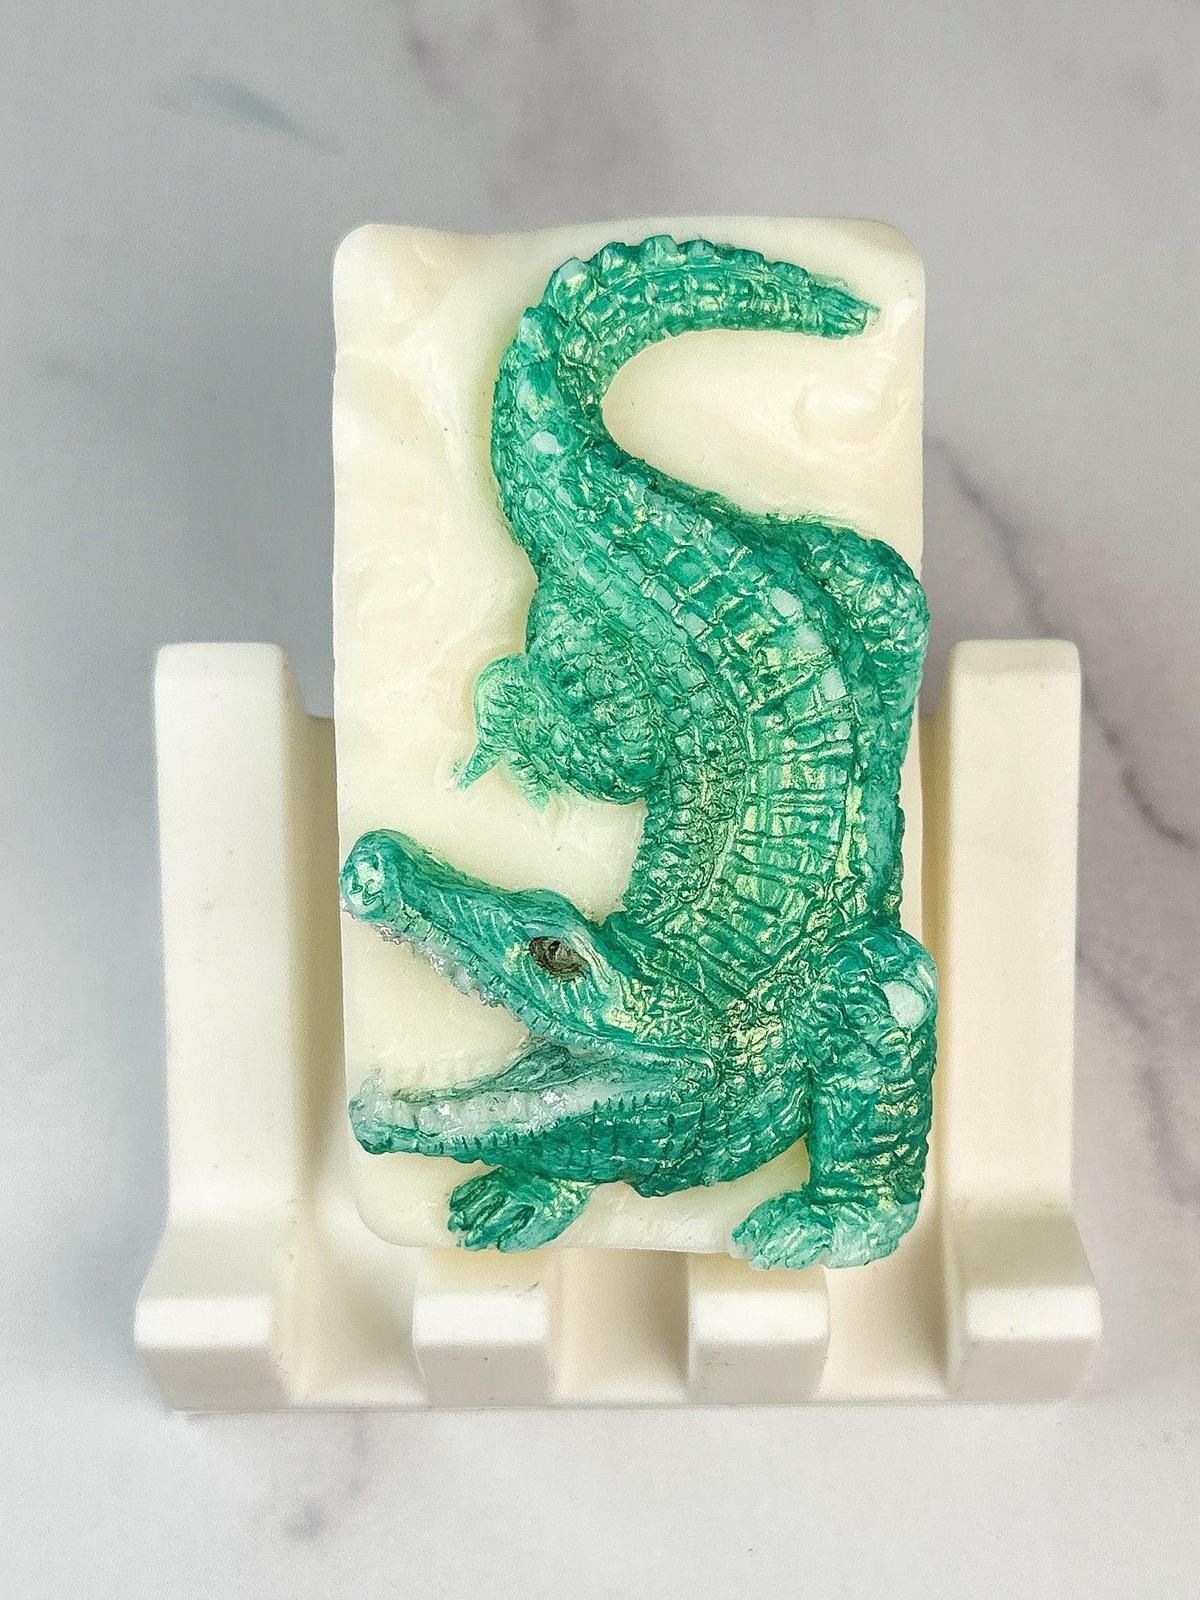 Painted Soap - Sea Salt and Lily - The Serpentry